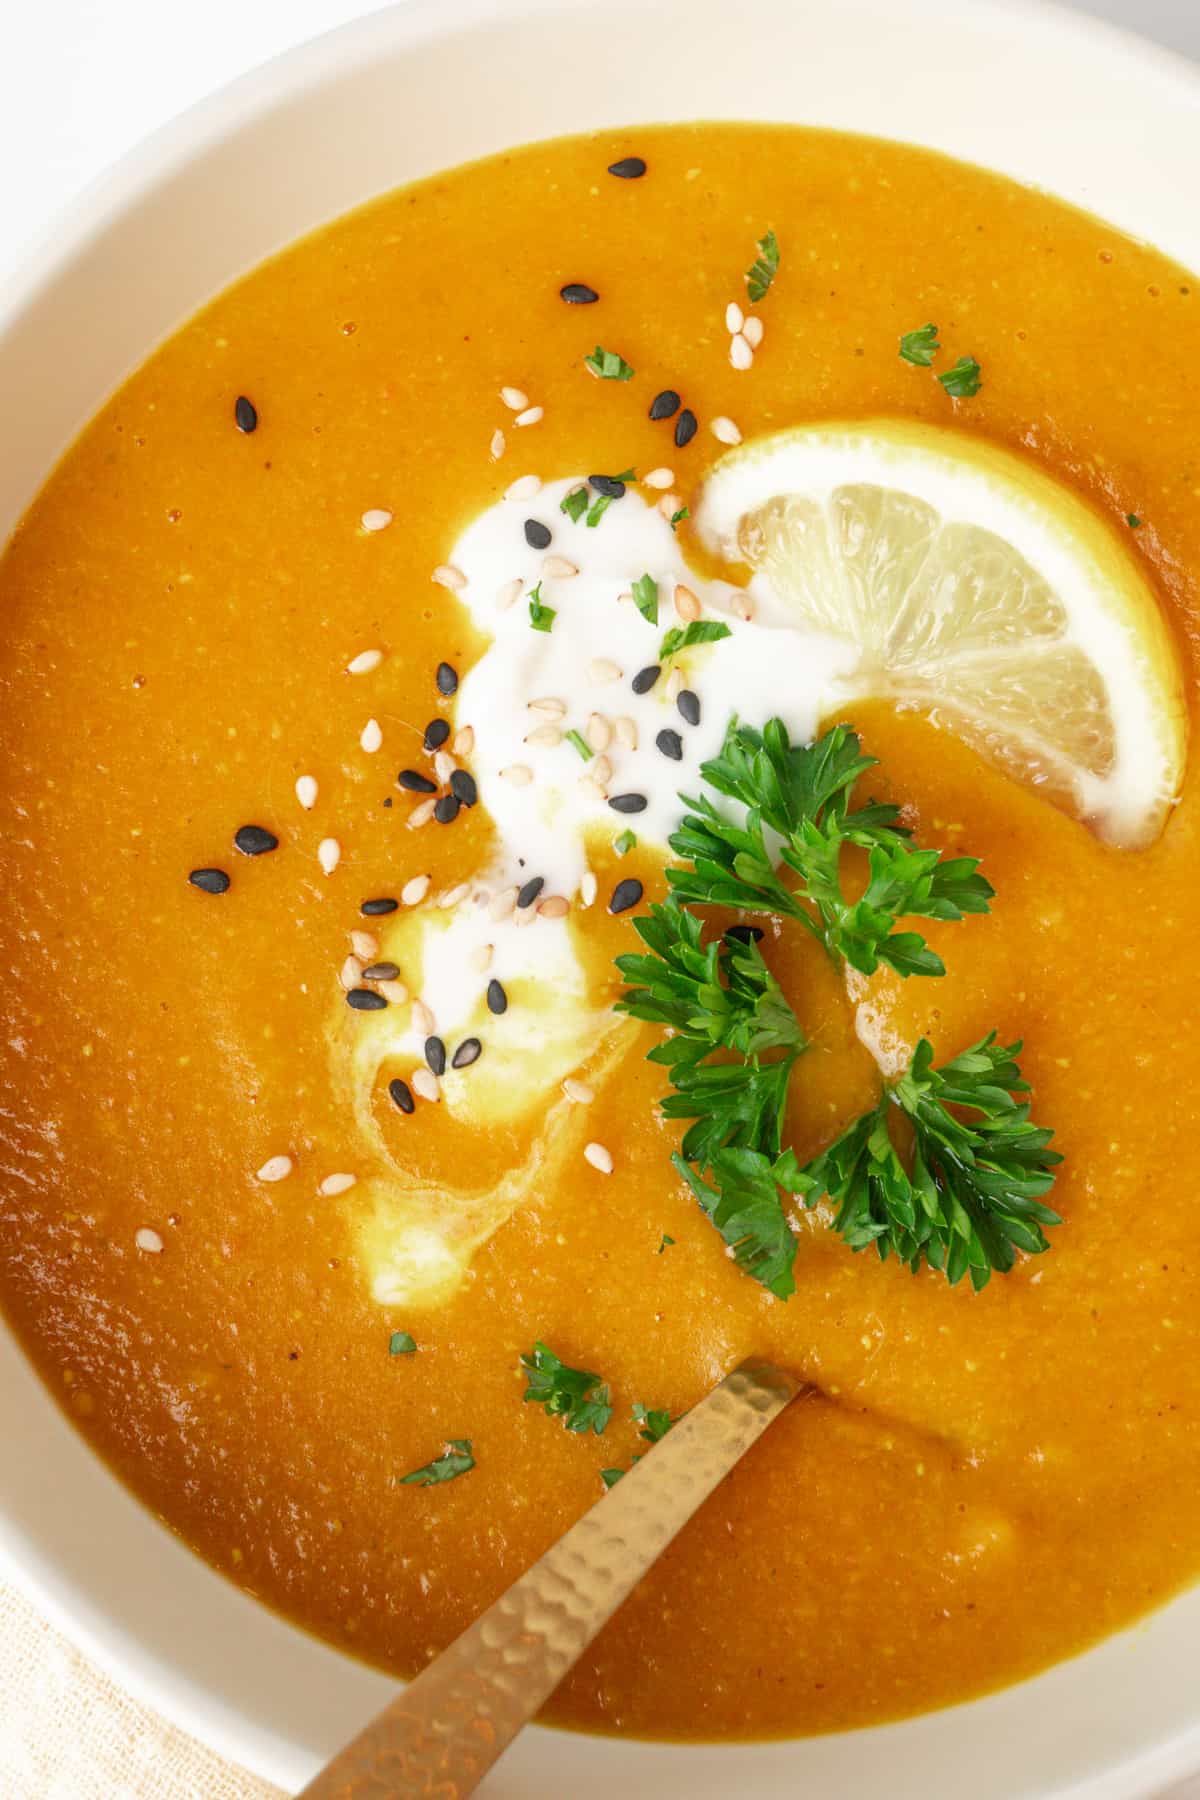 A bowl of blended carrot and red lentil soup topped with a spoonful of vegan creme fraiche, chopped parsley, sesame seeds and a slice of lemon.